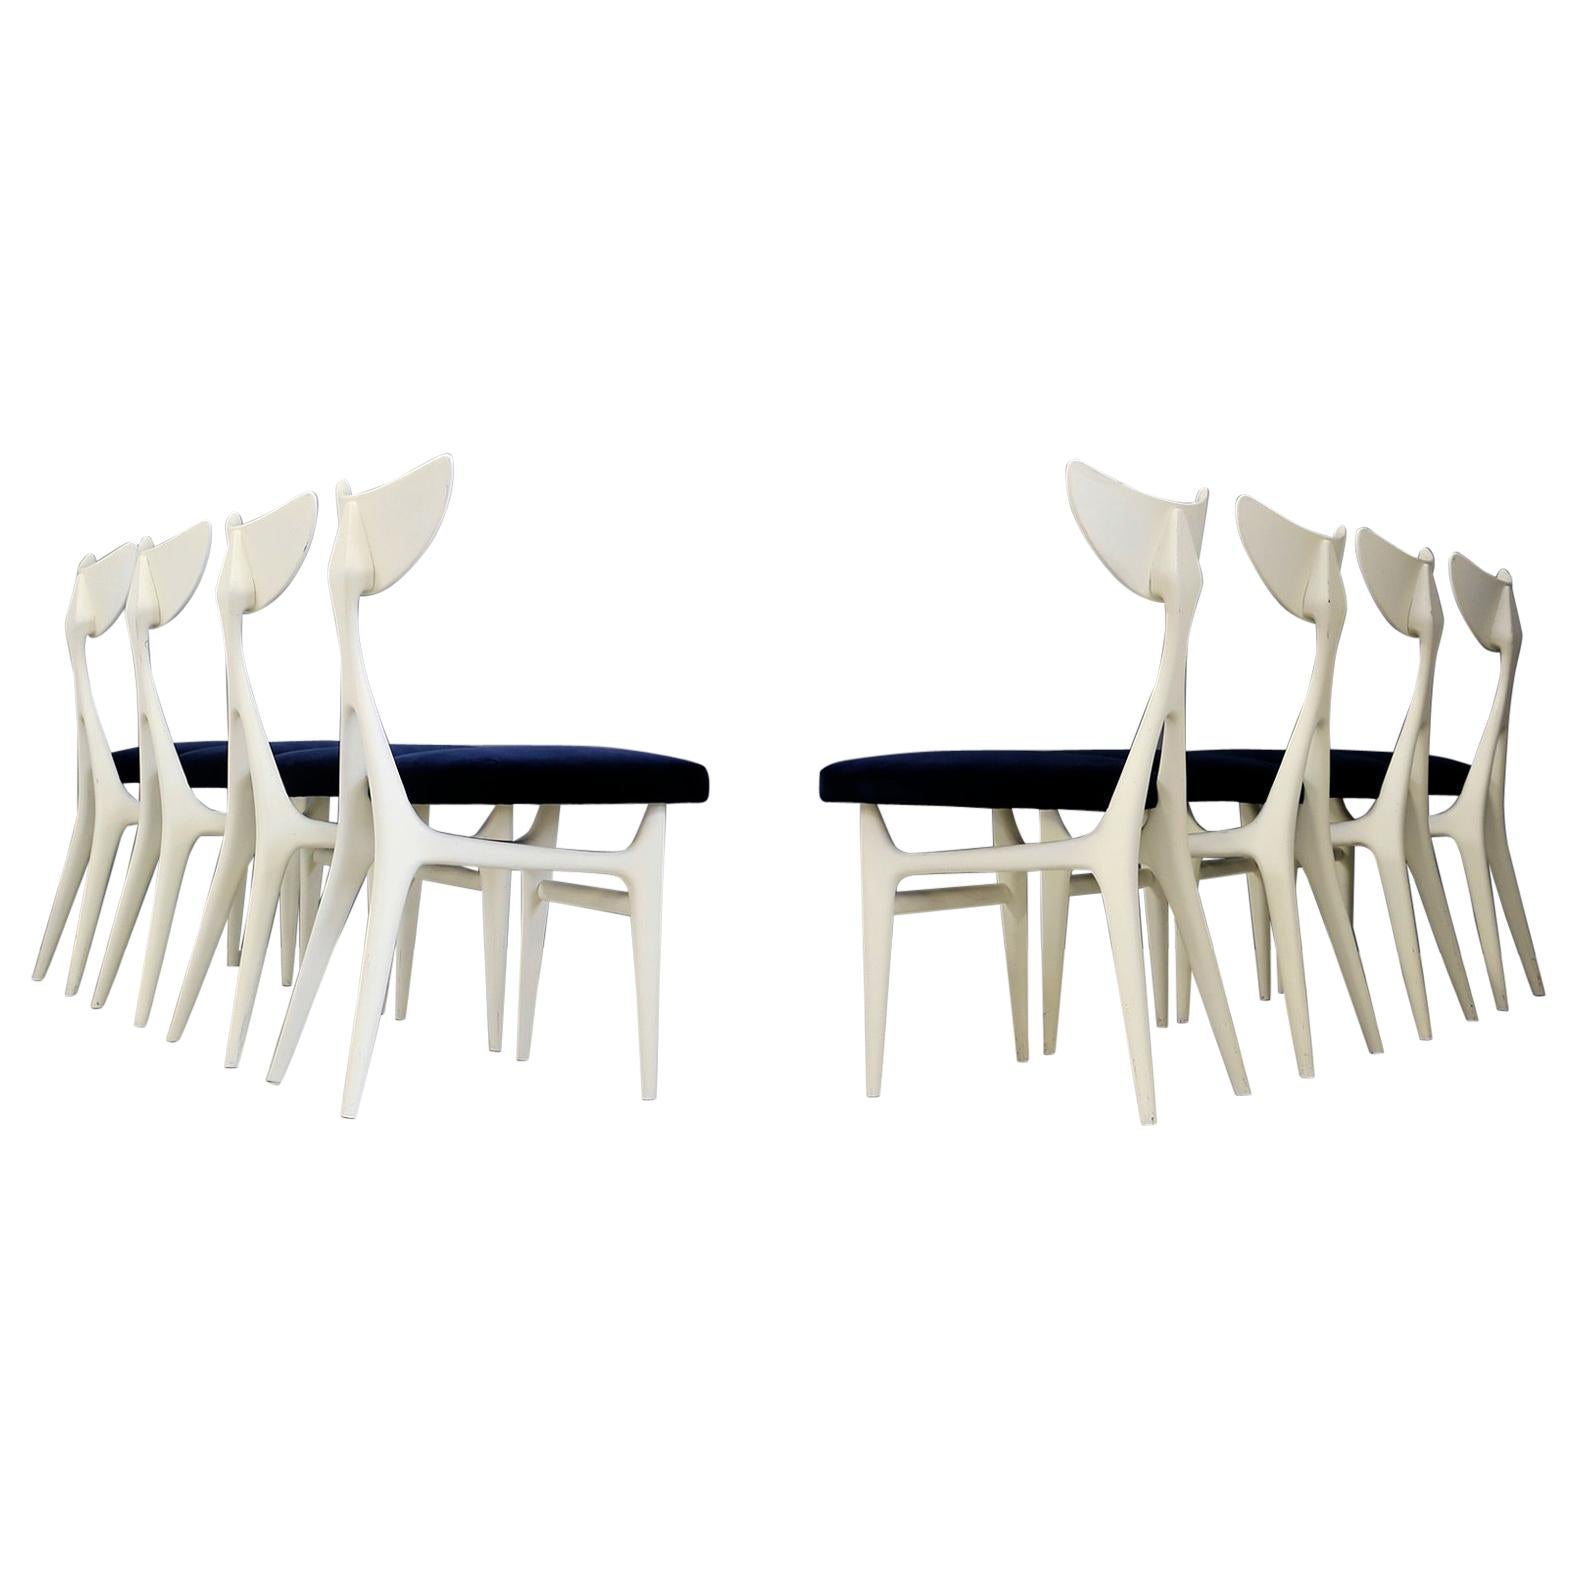 Set of Eight Chairs Midcentury by Ennio Canino in White and Blue Published, 1954